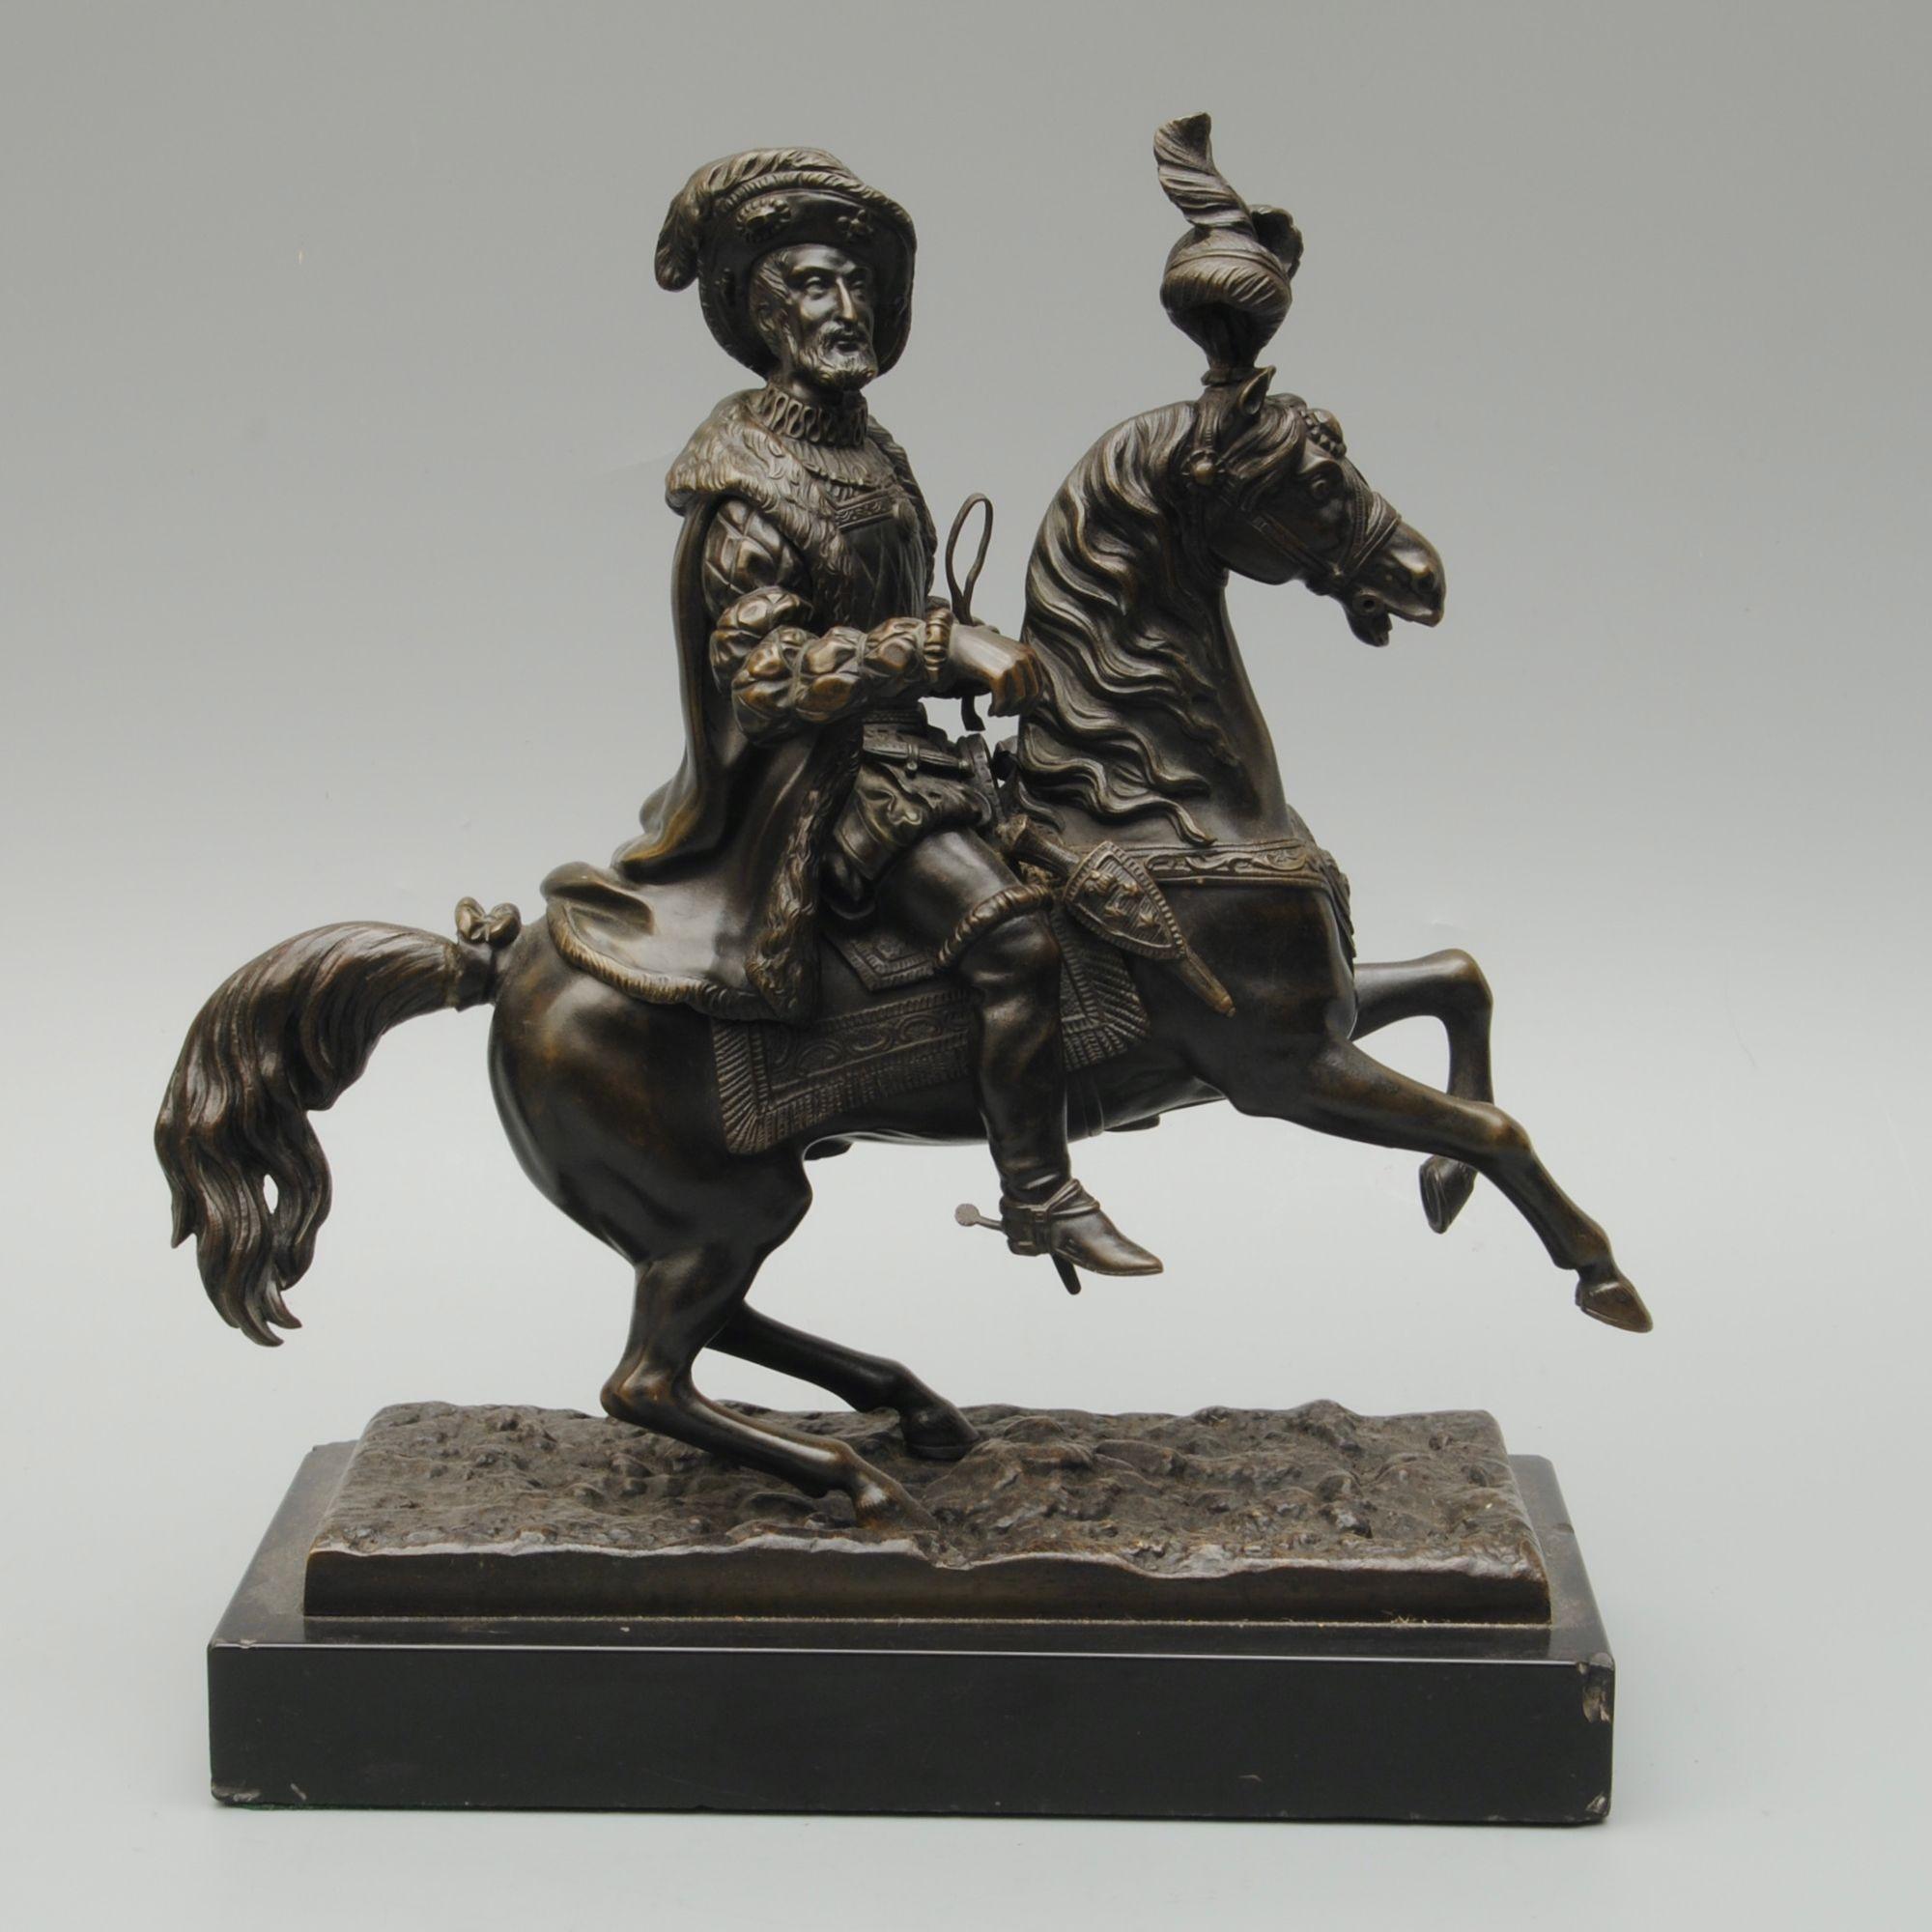 A decorative French bronze figure of Francois 1st on his horse in full dress and the horse with a feather plume. Presented on a black marble base.